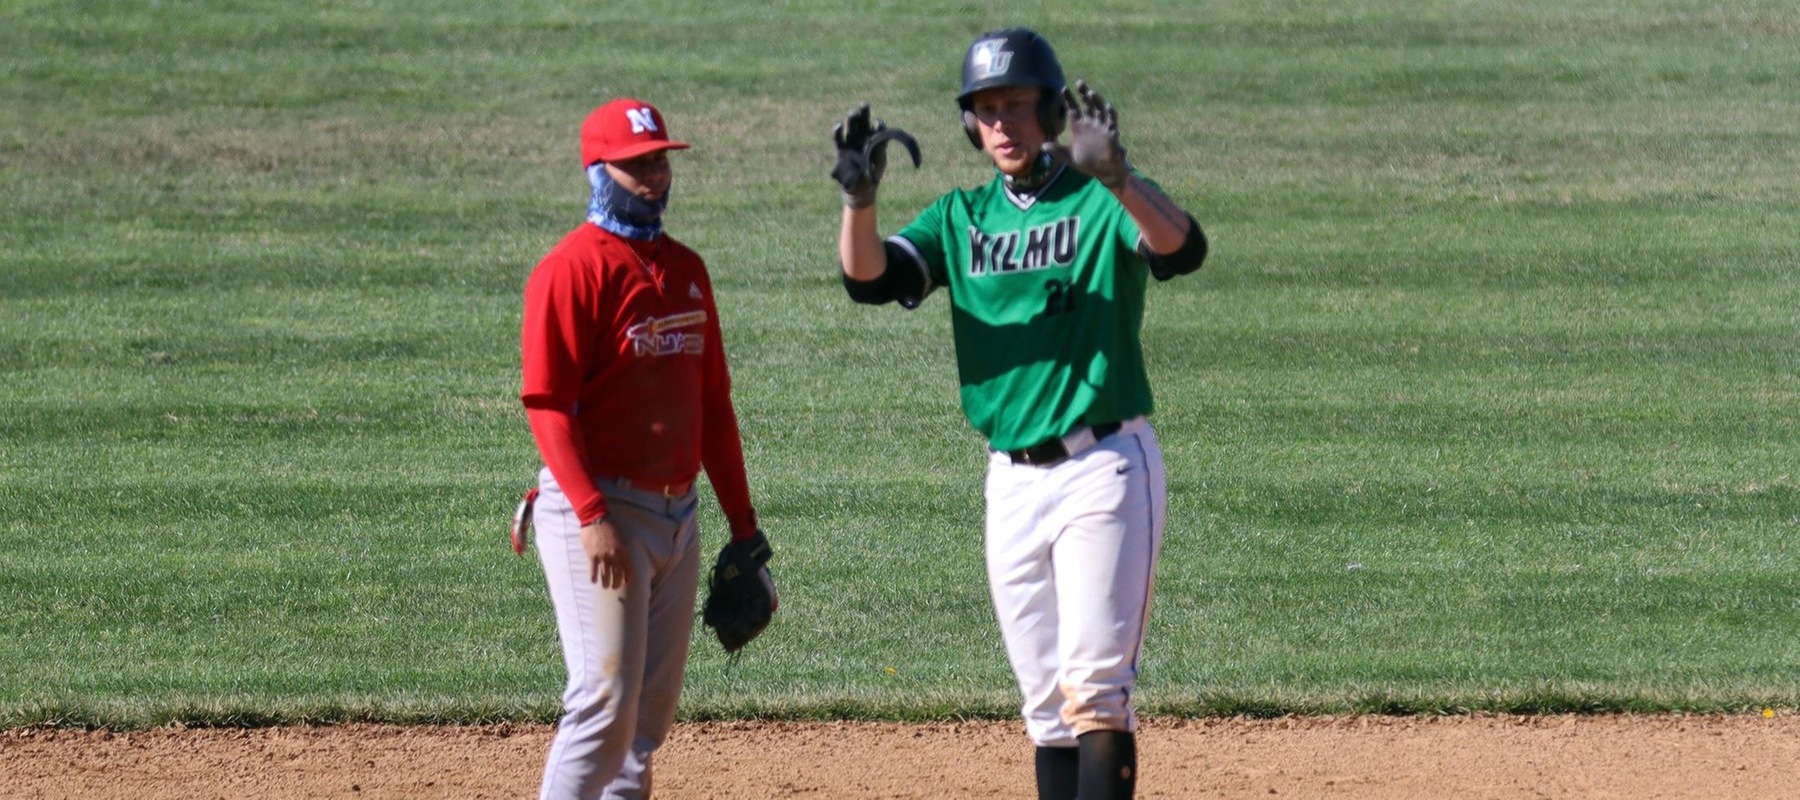 Copyright 2021; Wilmington University. All rights reserved. Photo by Dan Lauletta. April 13, 2021 vs. Nyack at Wilson Field.